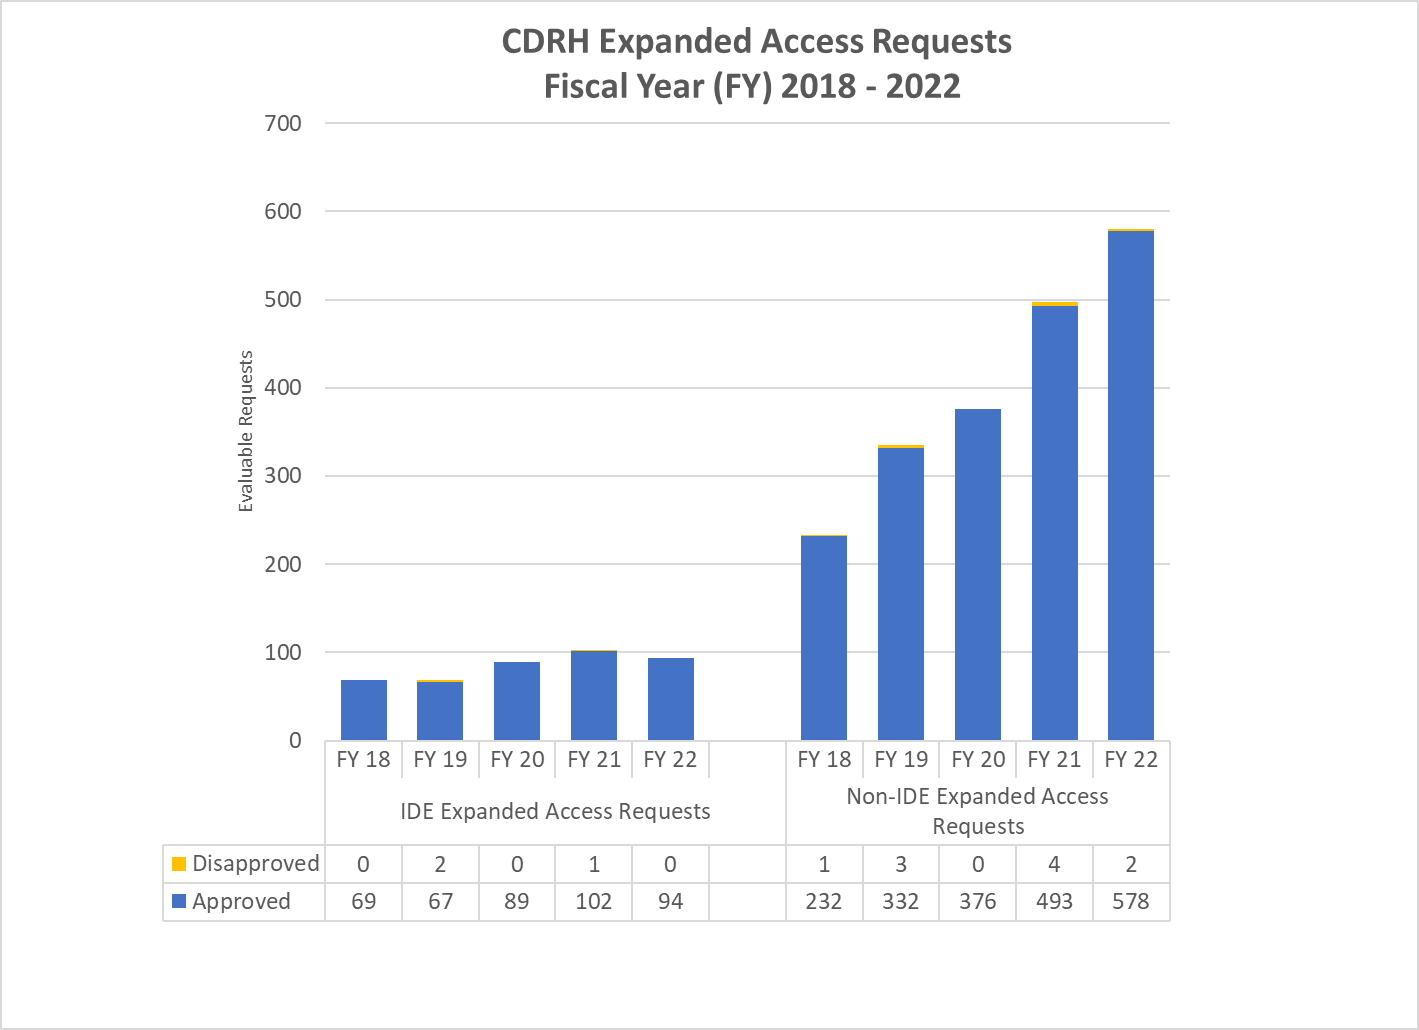 CDRH Expanded Access Requests Fiscal Year (FY) 2018 - 2022